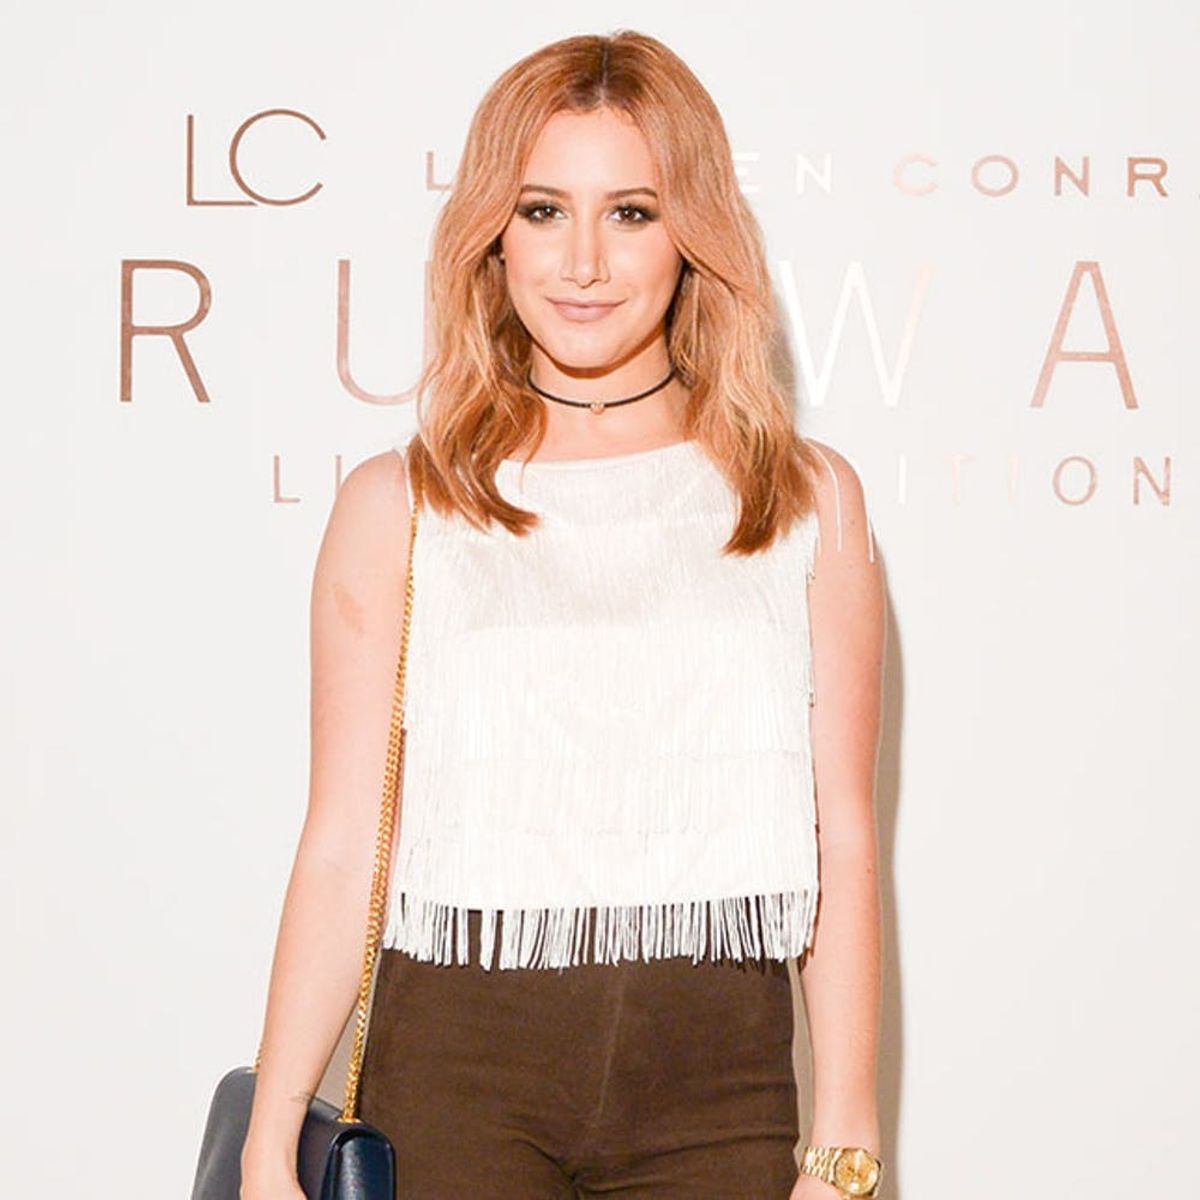 Ashley Tisdale Shares Her Favorite Career Advice from Friend Lauren Conrad